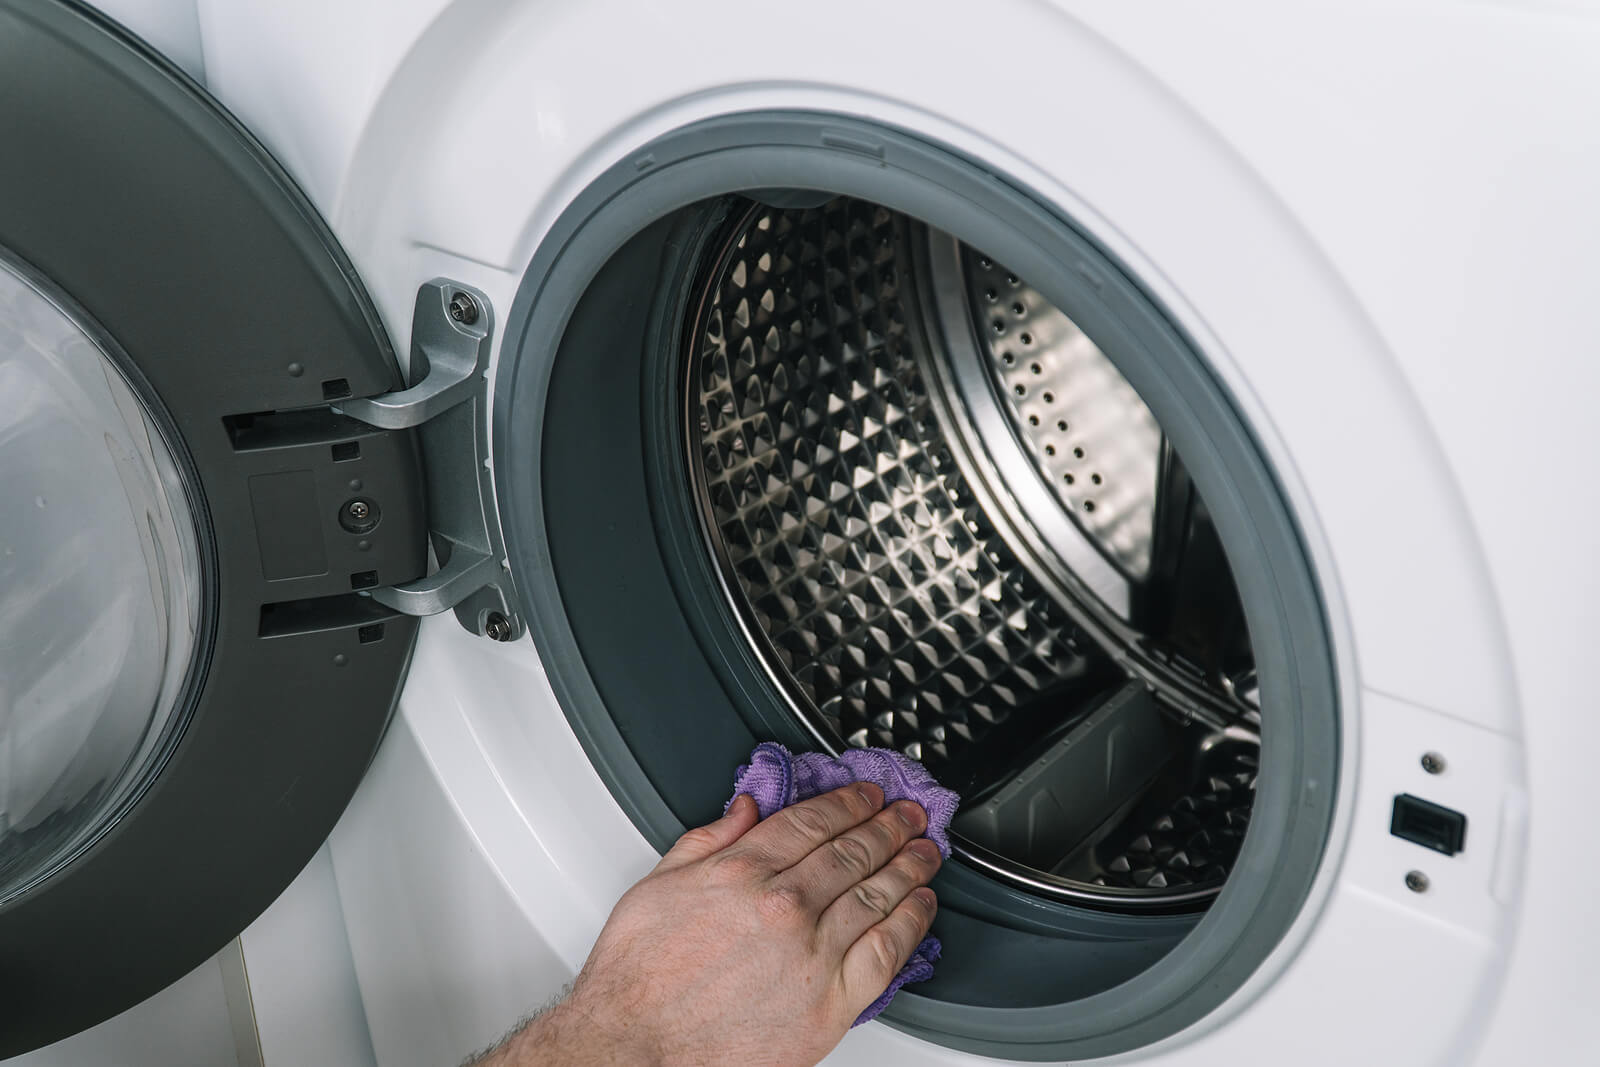 Removing lint from the washing machine.